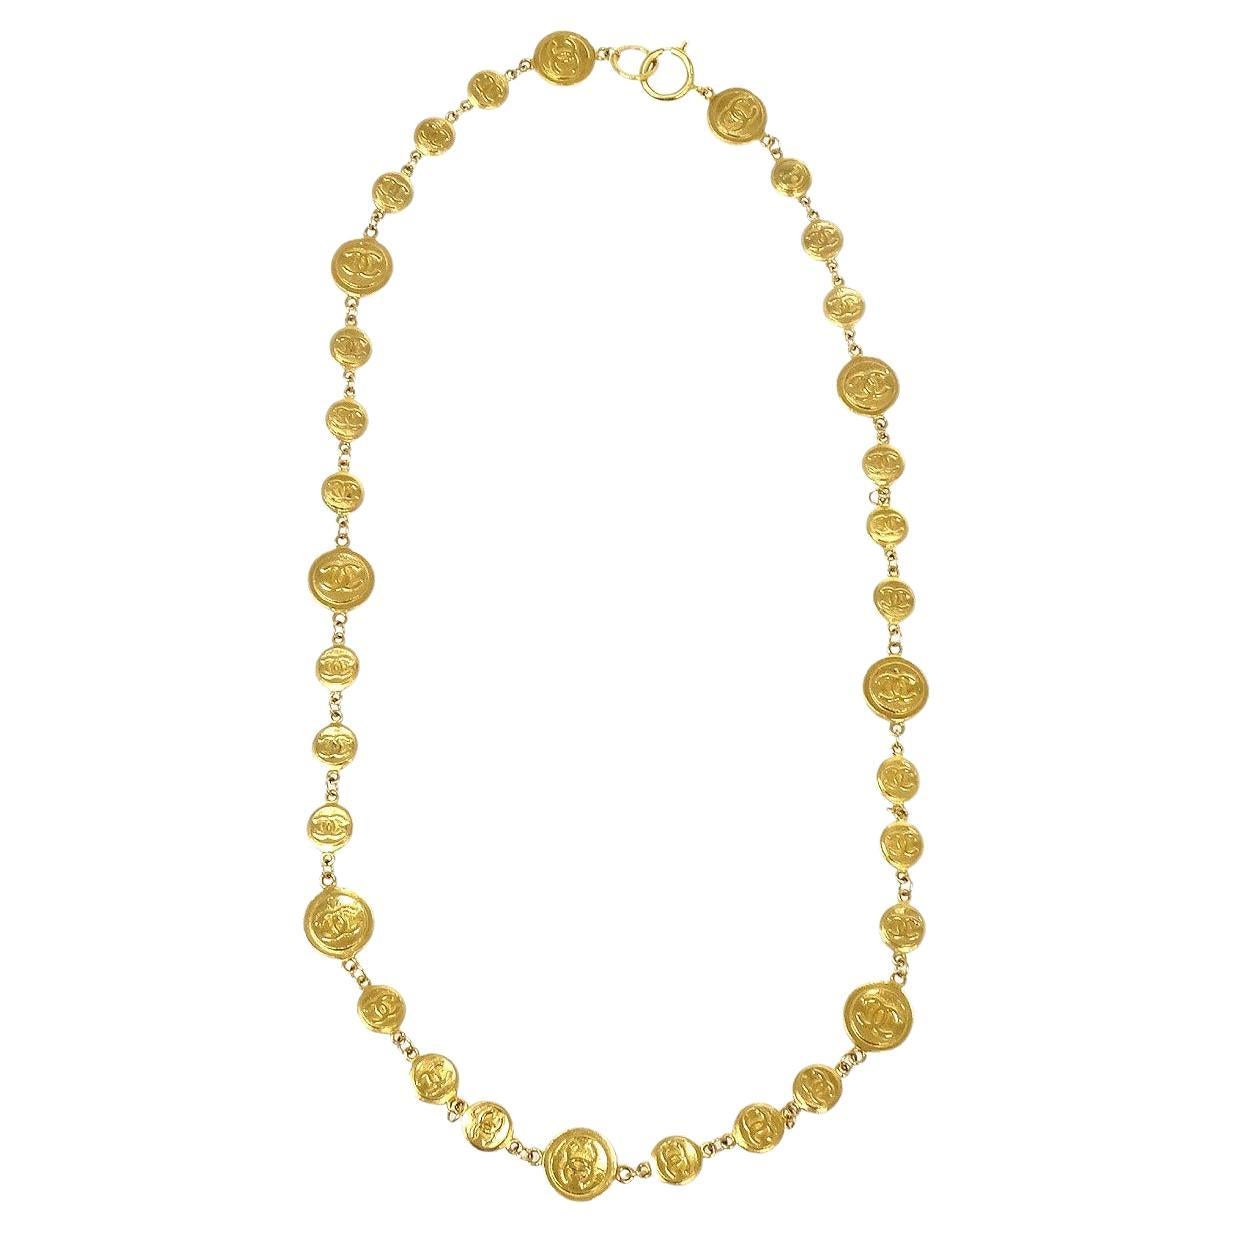 CHANEL 24K Gold Metal Plated Charm Coin Long Chain Necklace 